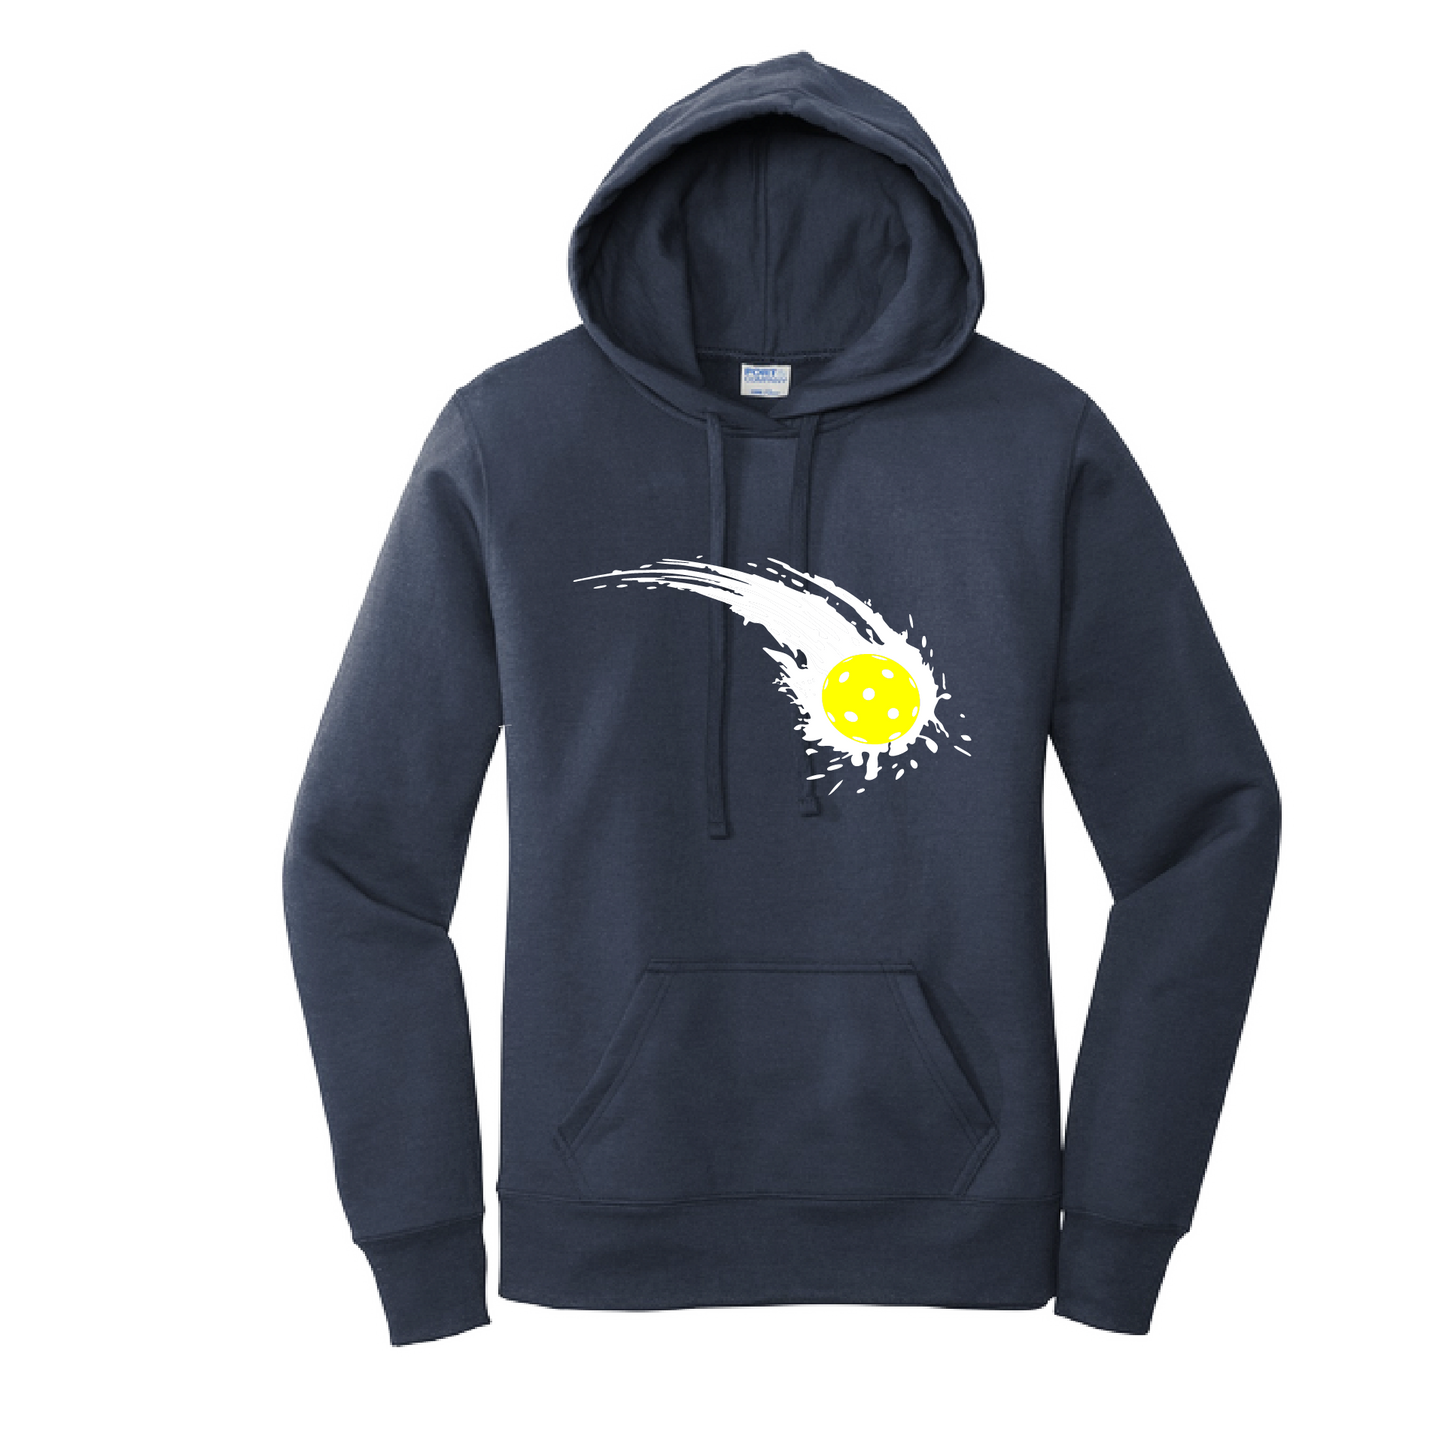 Pickleball Design: Impact  Women's Hooded pullover Sweatshirt  Turn up the volume in this Women's Sweatshirts with its perfect mix of softness and attitude. Ultra soft lined inside with a lined hood also. This is fitted nicely for a women's figure. Front pouch pocket.